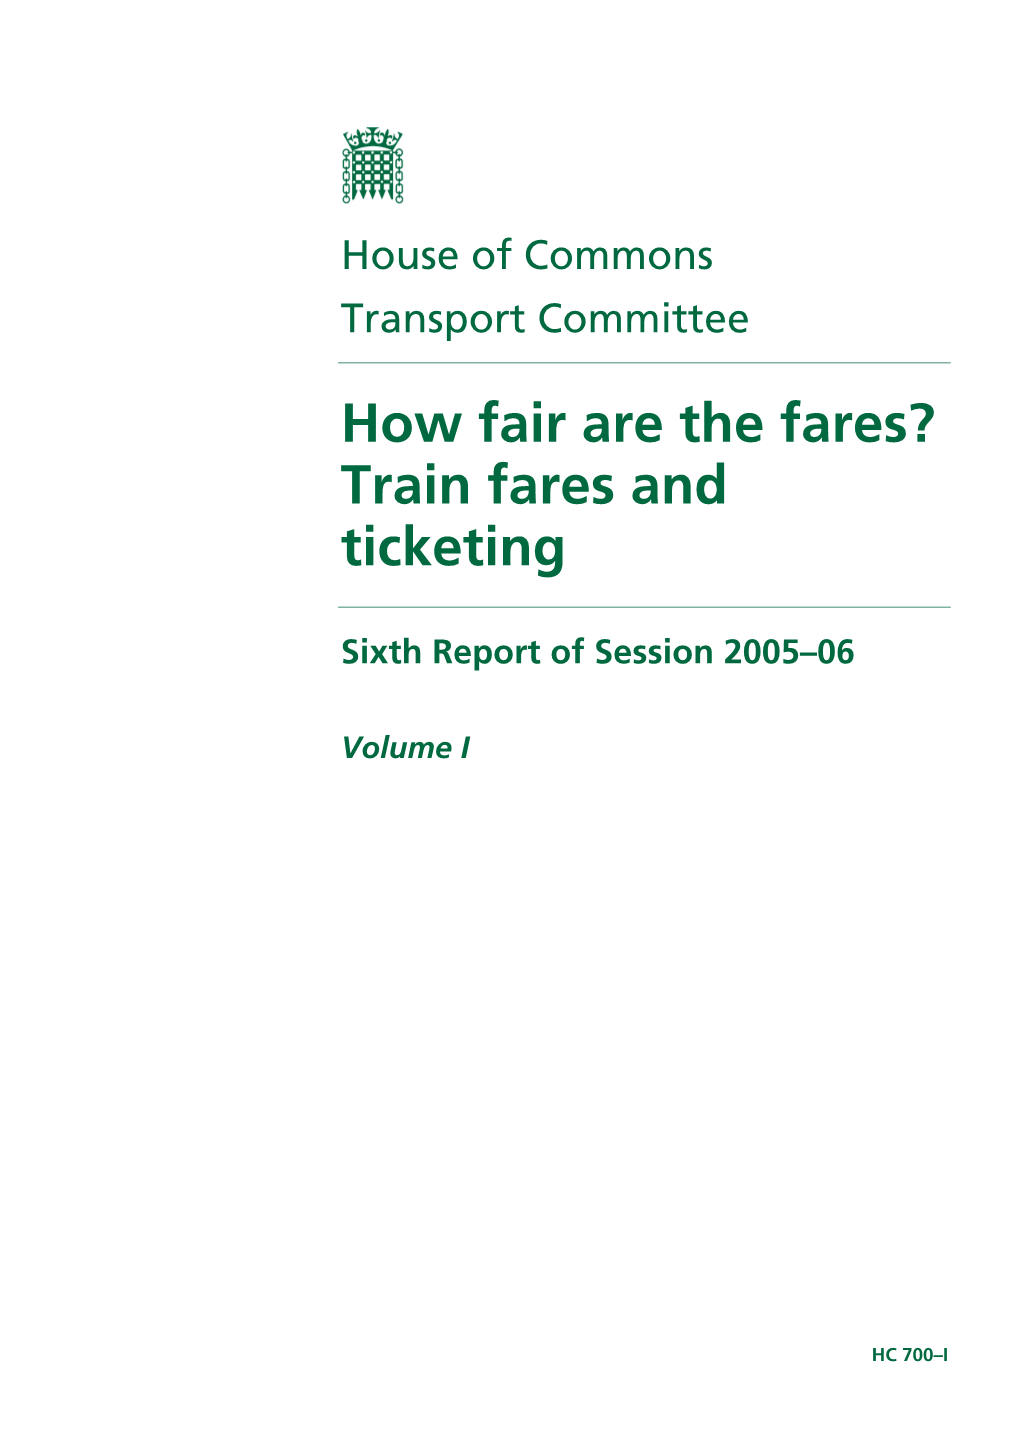 How Fair Are the Fares? Train Fares and Ticketing